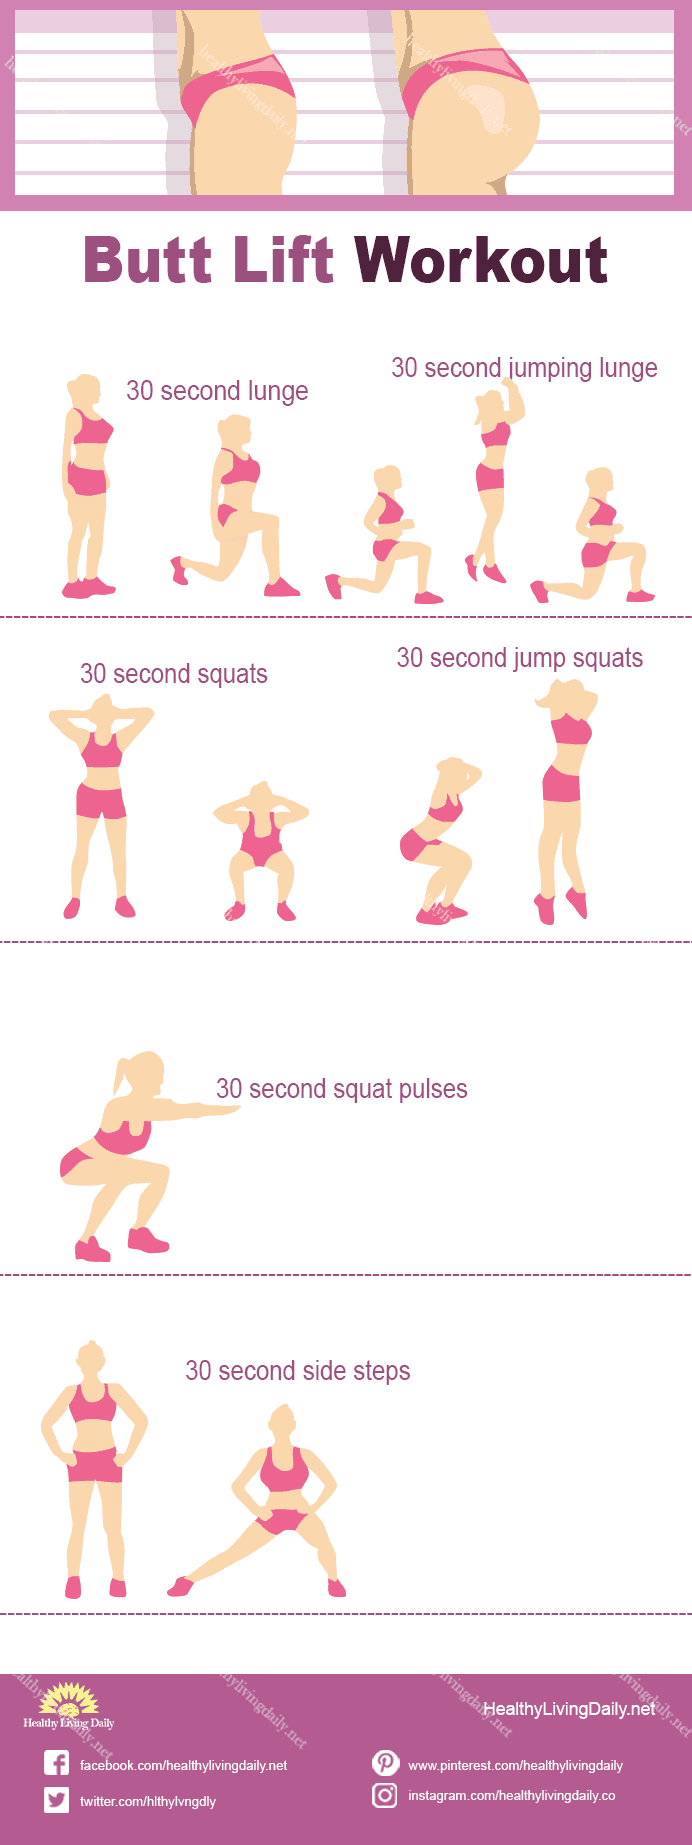 infographic image for butt lift workout